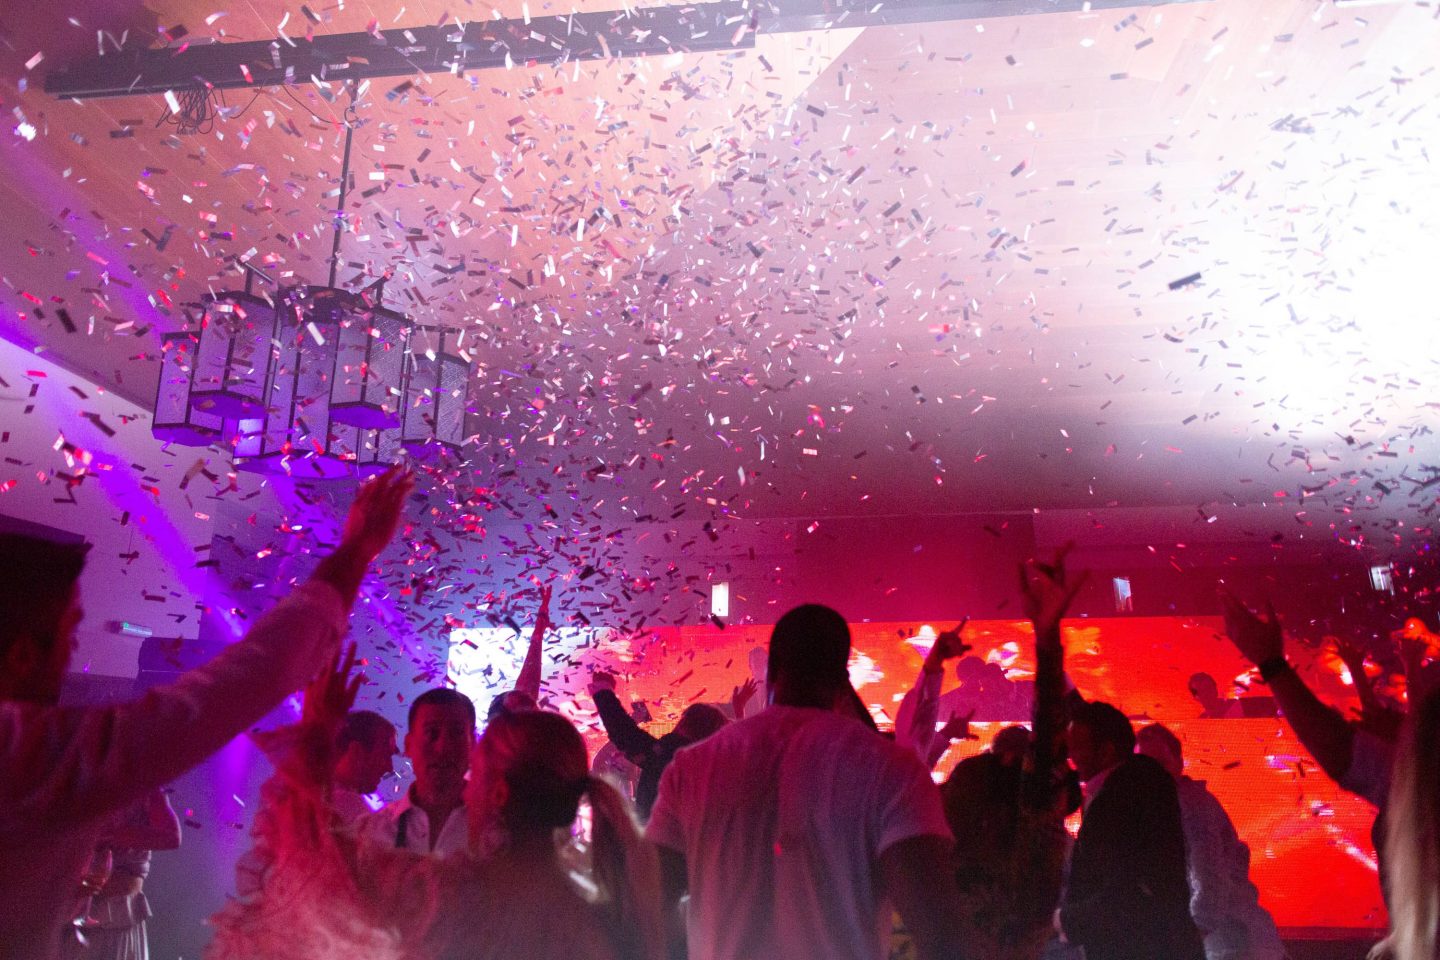 After party confetti and dancing at this Aman Sveti Stefan Montenegro destination wedding weekend | Photo by Allan Zepeda